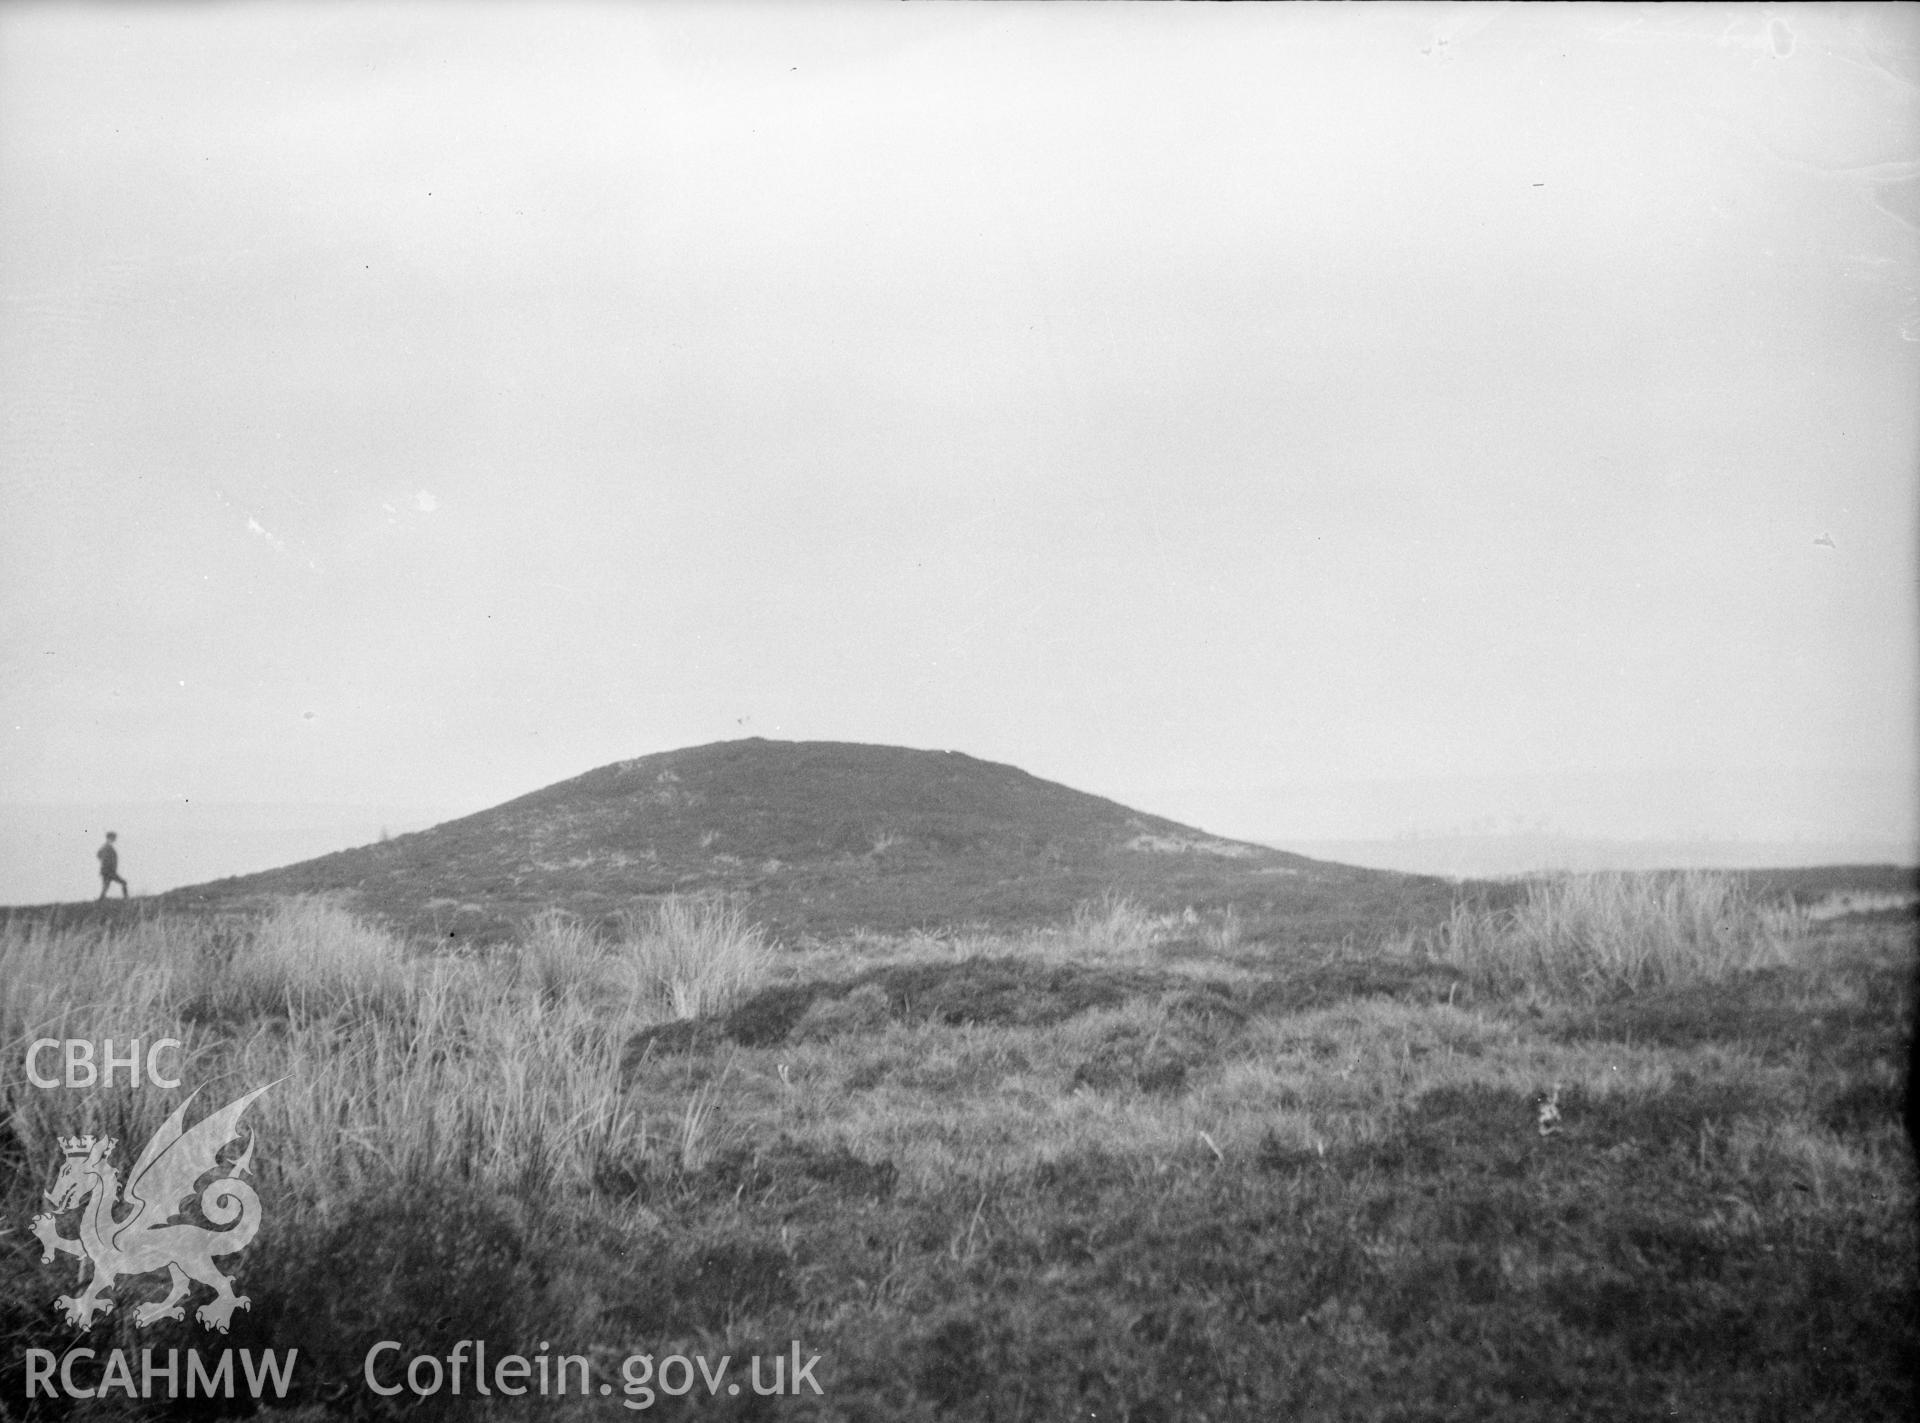 Digital copy of a black and white negative relating to Bedd y Cawr Camp. From the Cadw Monuments in Care Collection.